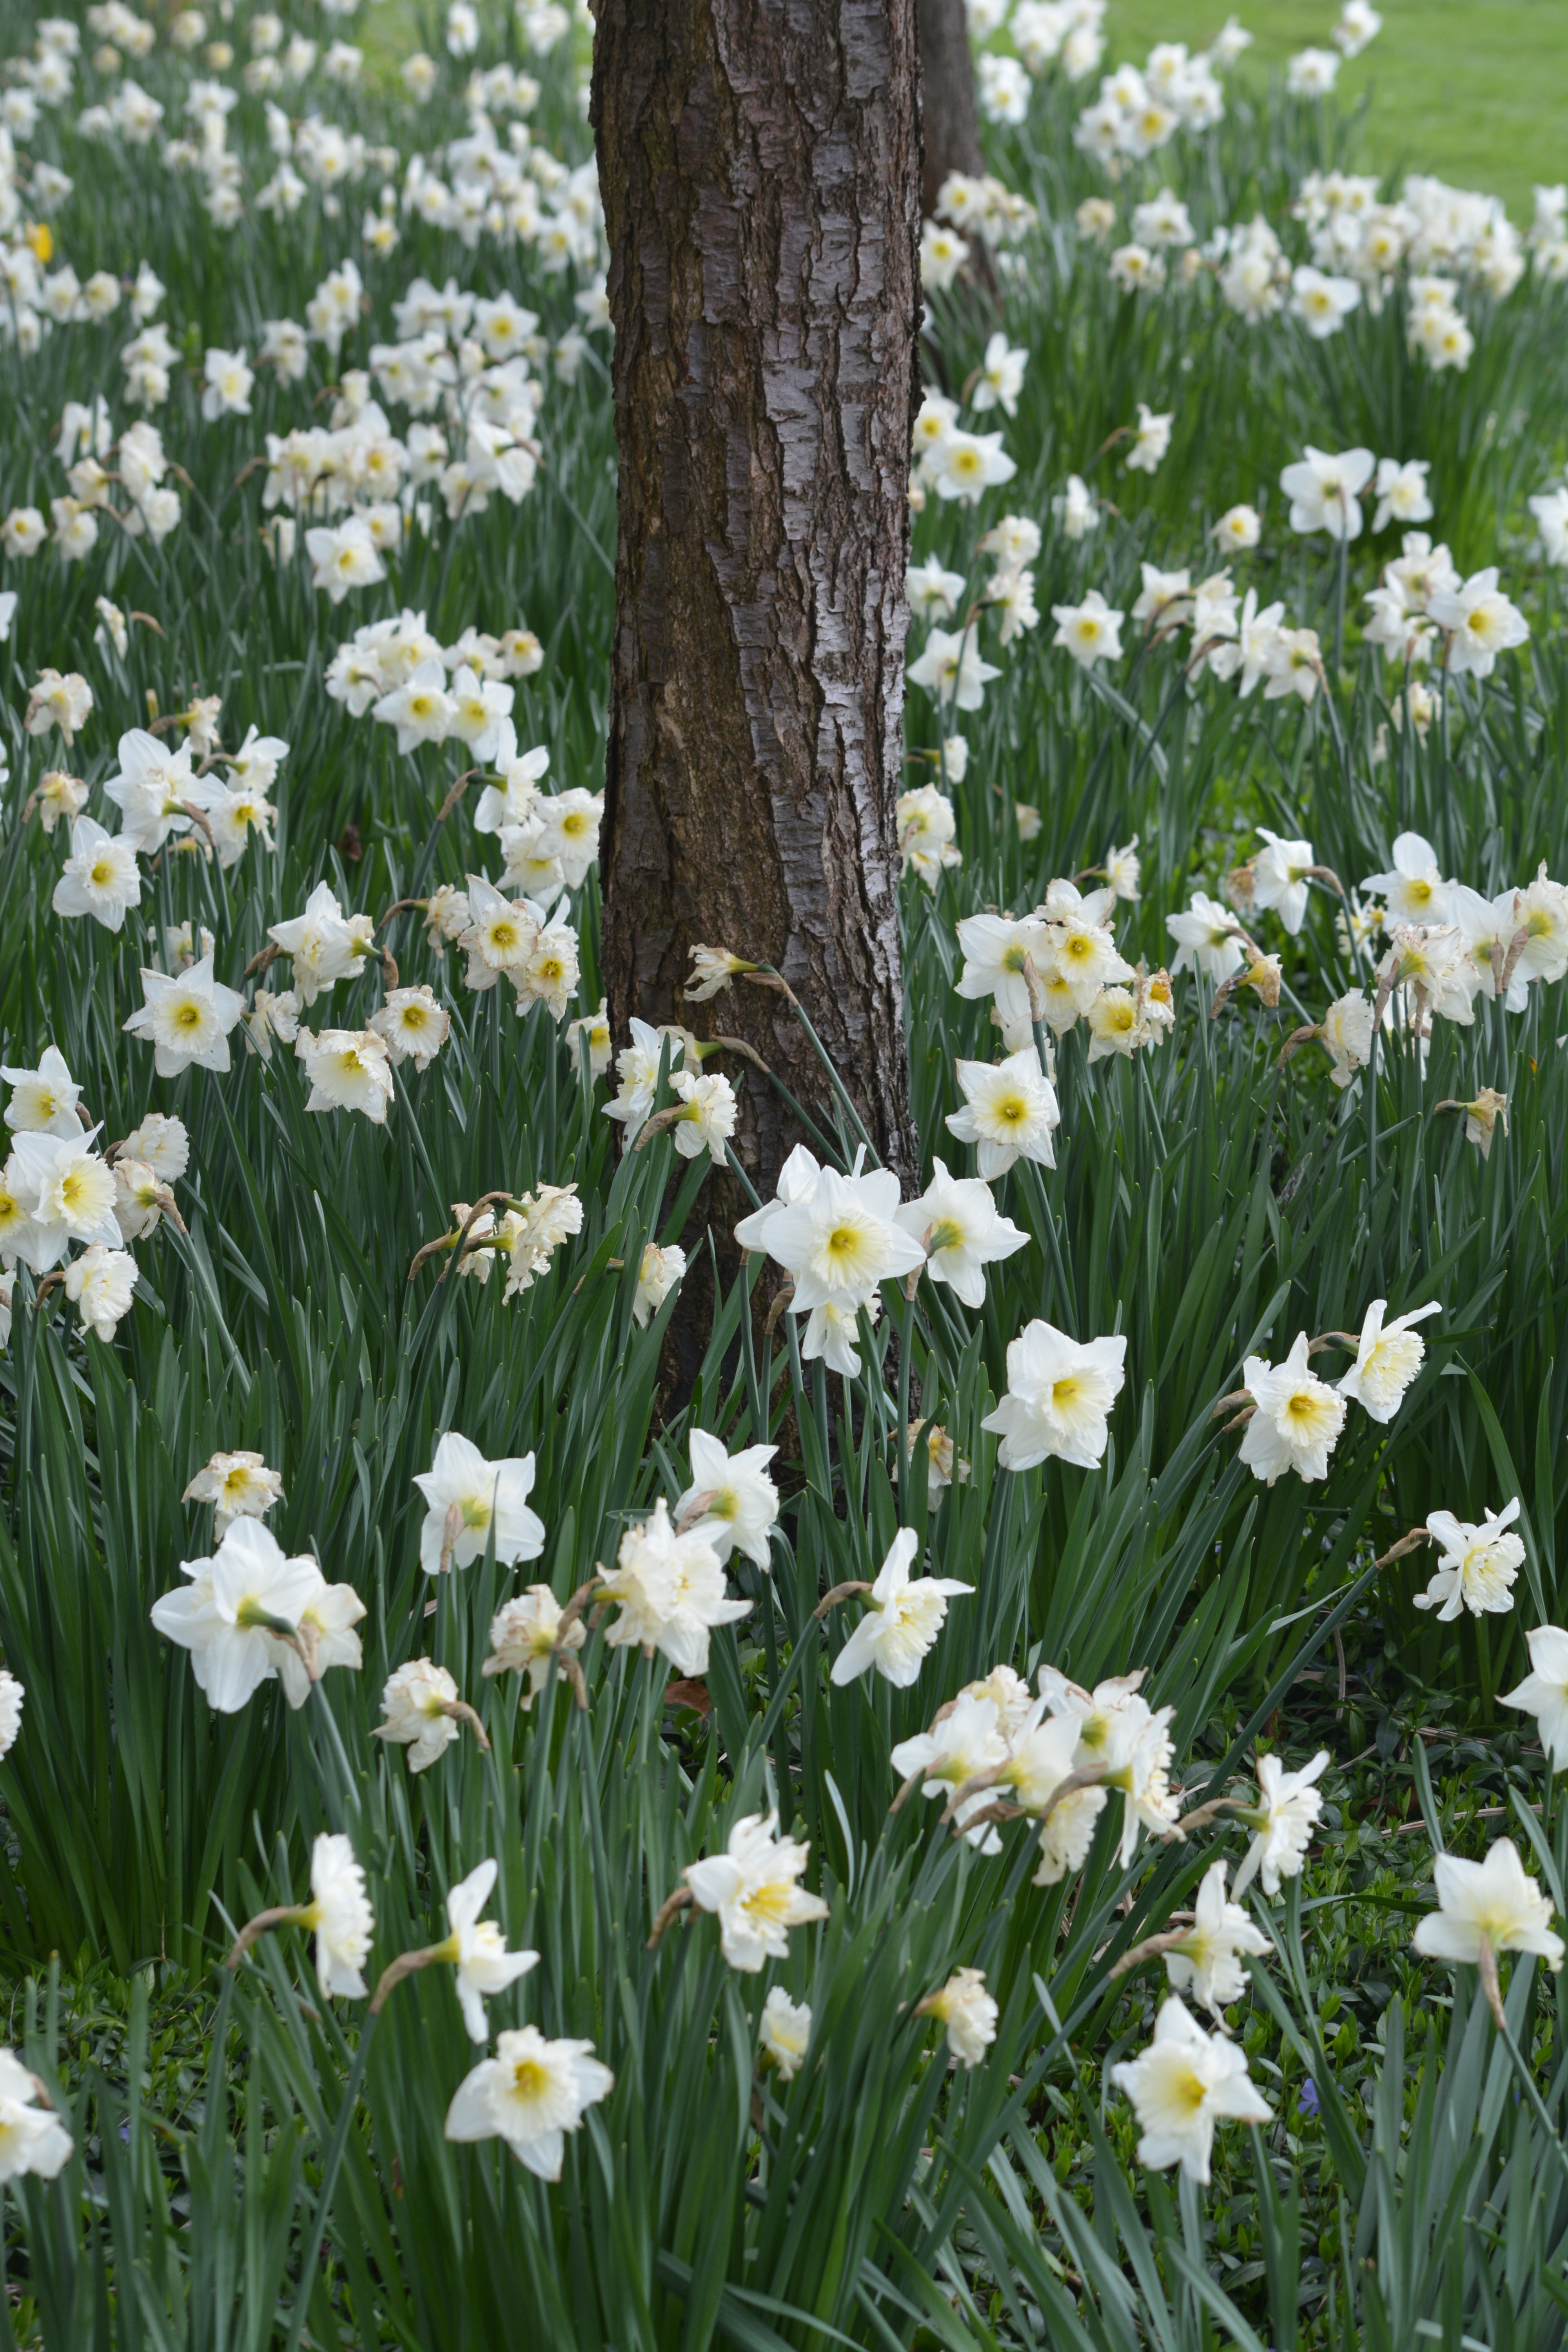 white and yellow daffodils